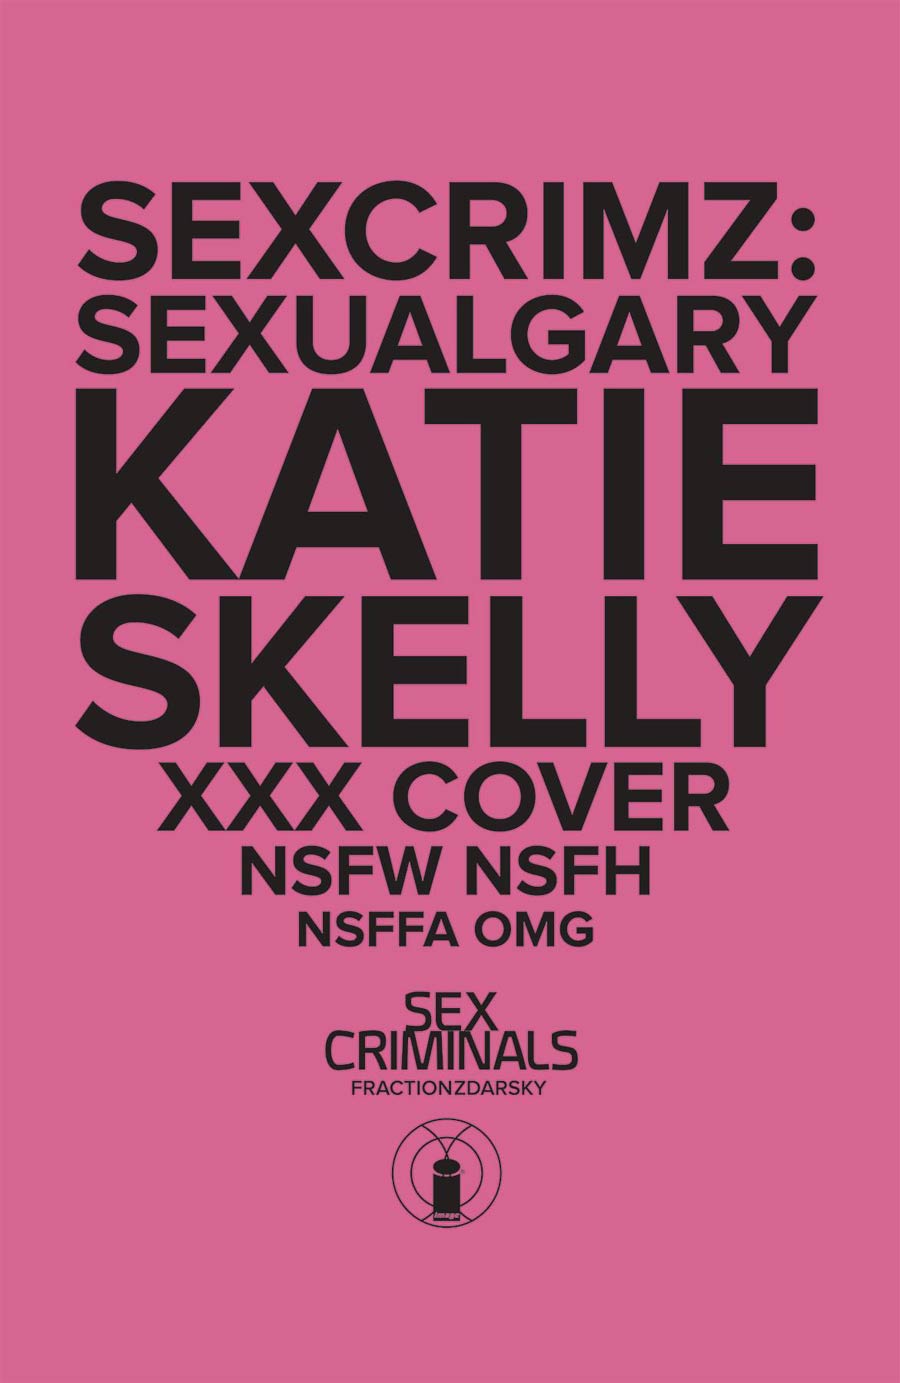 Sex Criminals Sexual Gary Special Cover B Variant Katie Skelly XXX Cover With Polybag